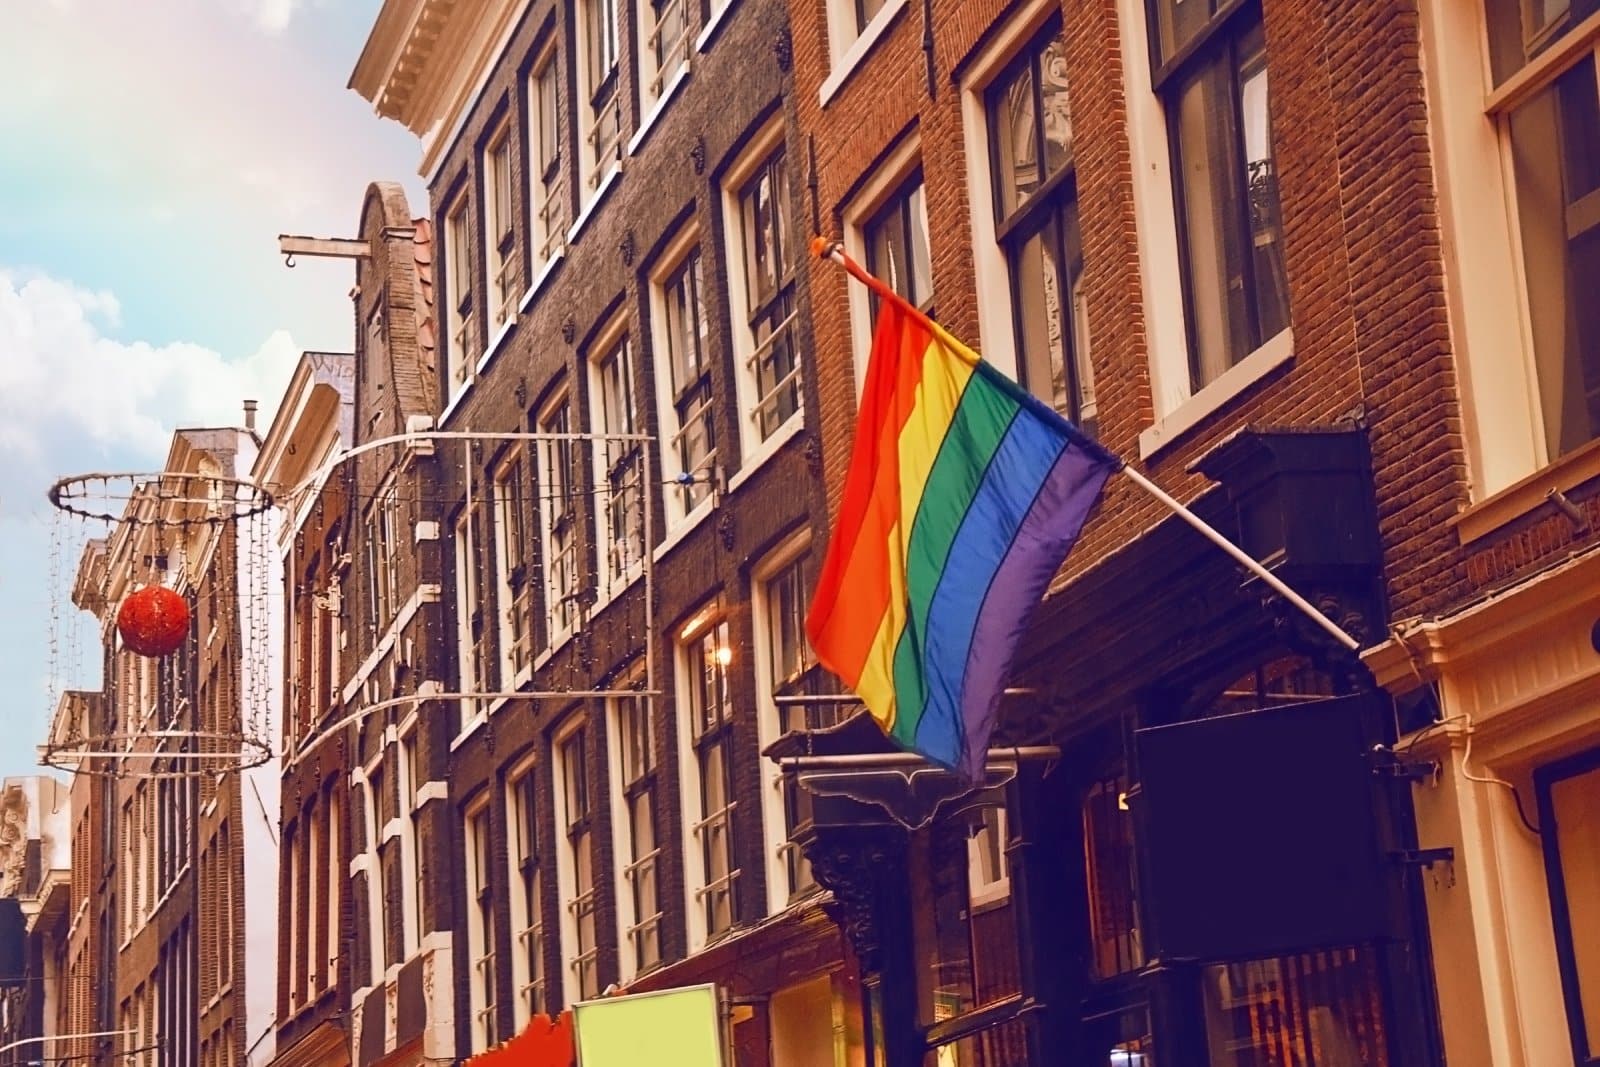 <p><span>Seek out accommodations that are known to be LGBTQ+-friendly. Many hotels and B&Bs around the world proudly advertise their inclusivity. Websites like Purple Roofs and TAG Approved offer directories of LGBTQ+-friendly lodging. Staying in these places ensures a welcoming environment and supports businesses that advocate for LGBTQ+ rights.</span></p> <p><b>Insider’s Tip: </b><span>Read reviews from other LGBTQ+ travelers for personal insights and experiences.</span></p>